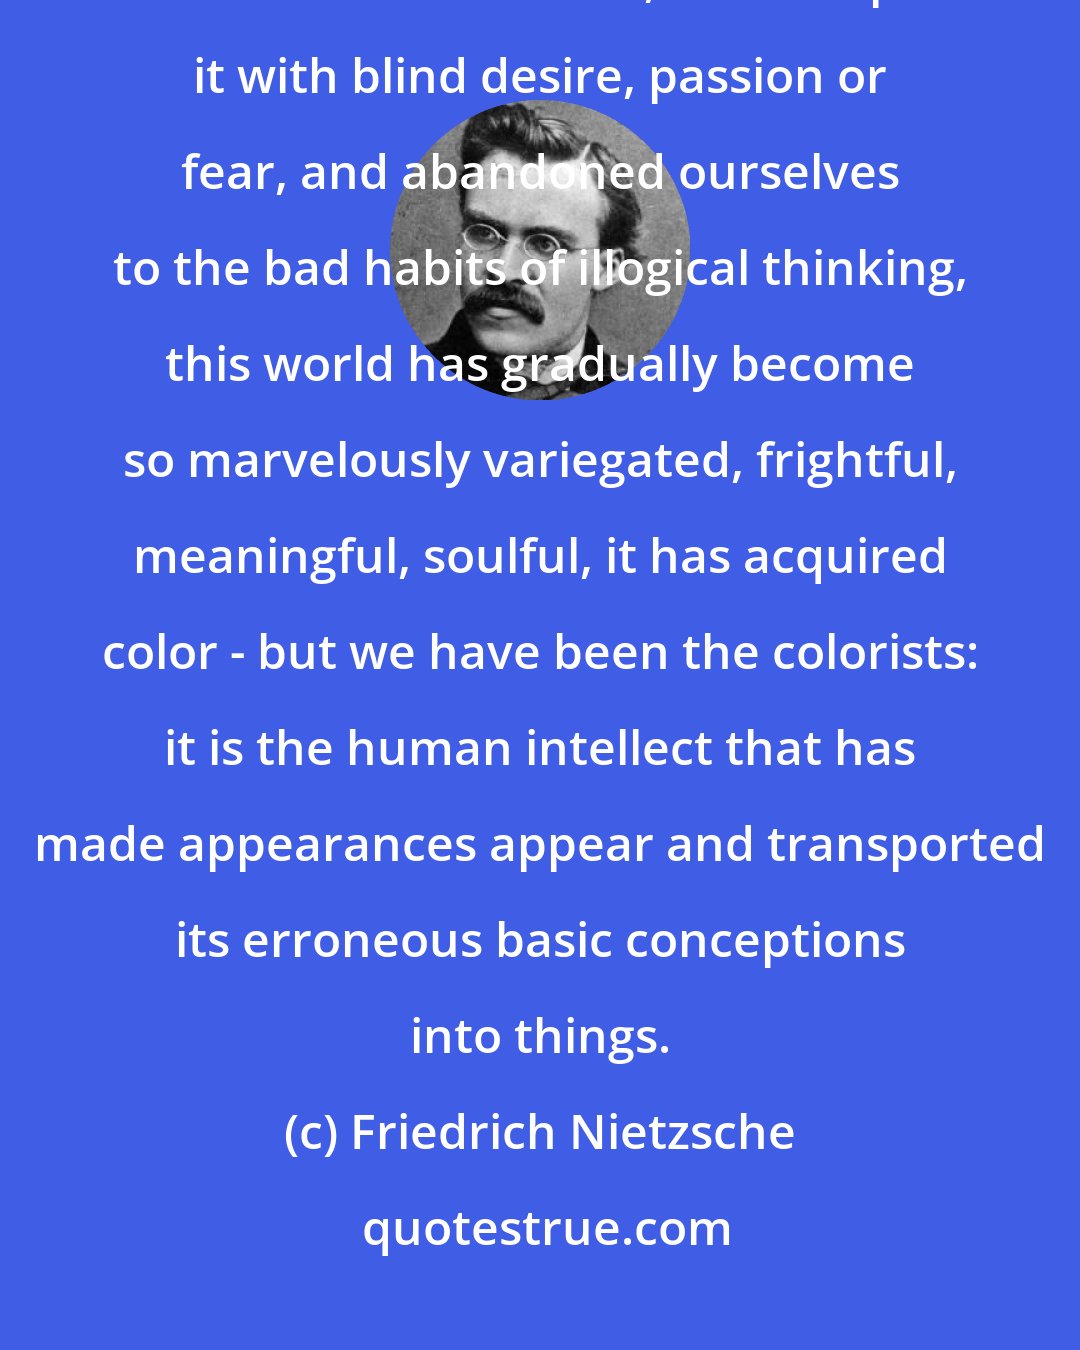 Friedrich Nietzsche: Because we have for millenia made moral, aesthetic, religious demands on the world, looked upon it with blind desire, passion or fear, and abandoned ourselves to the bad habits of illogical thinking, this world has gradually become so marvelously variegated, frightful, meaningful, soulful, it has acquired color - but we have been the colorists: it is the human intellect that has made appearances appear and transported its erroneous basic conceptions into things.